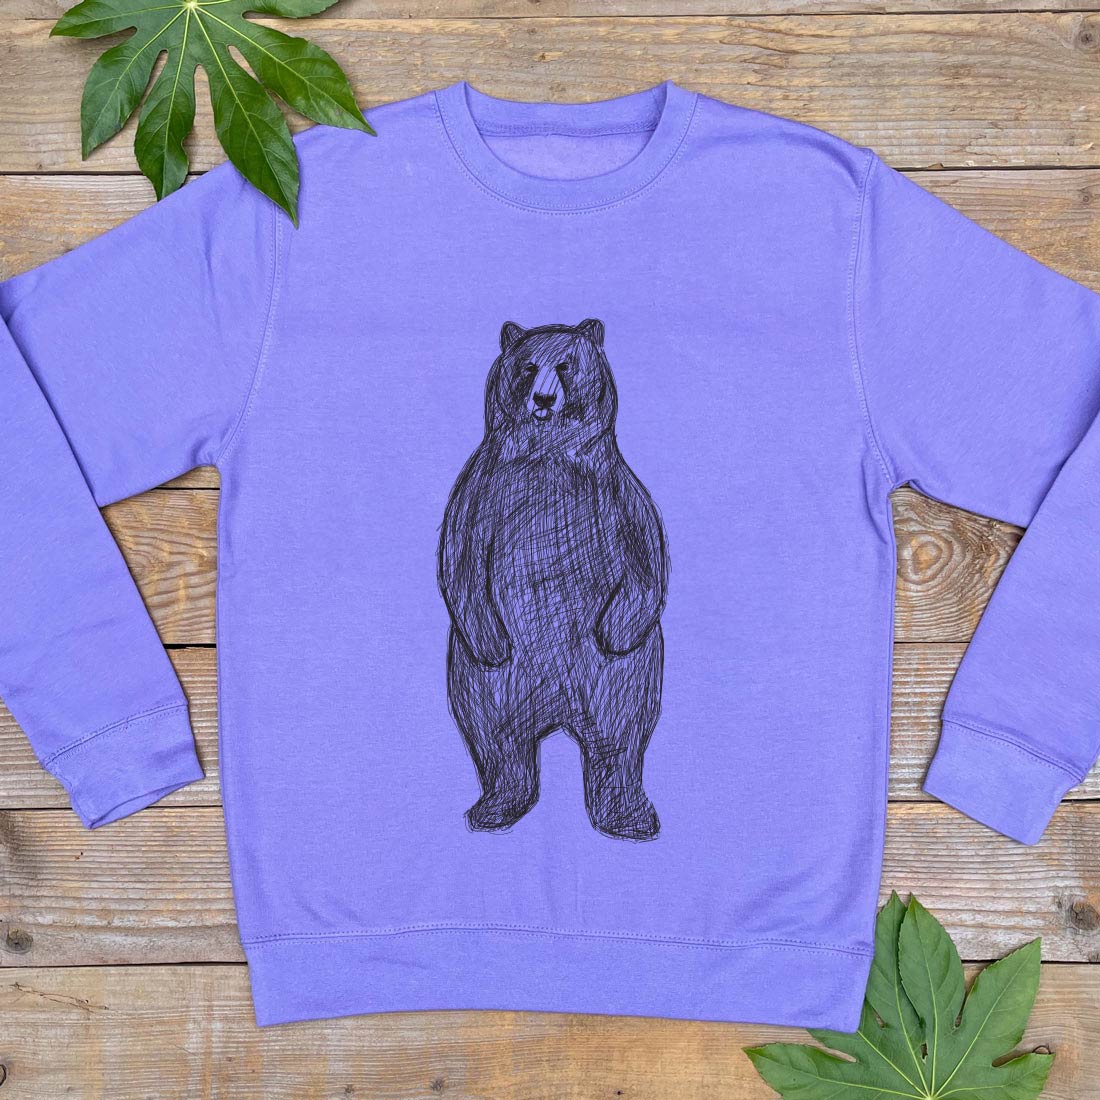 PURPLE JUMPER WITH PRINTED BEAR STANDING